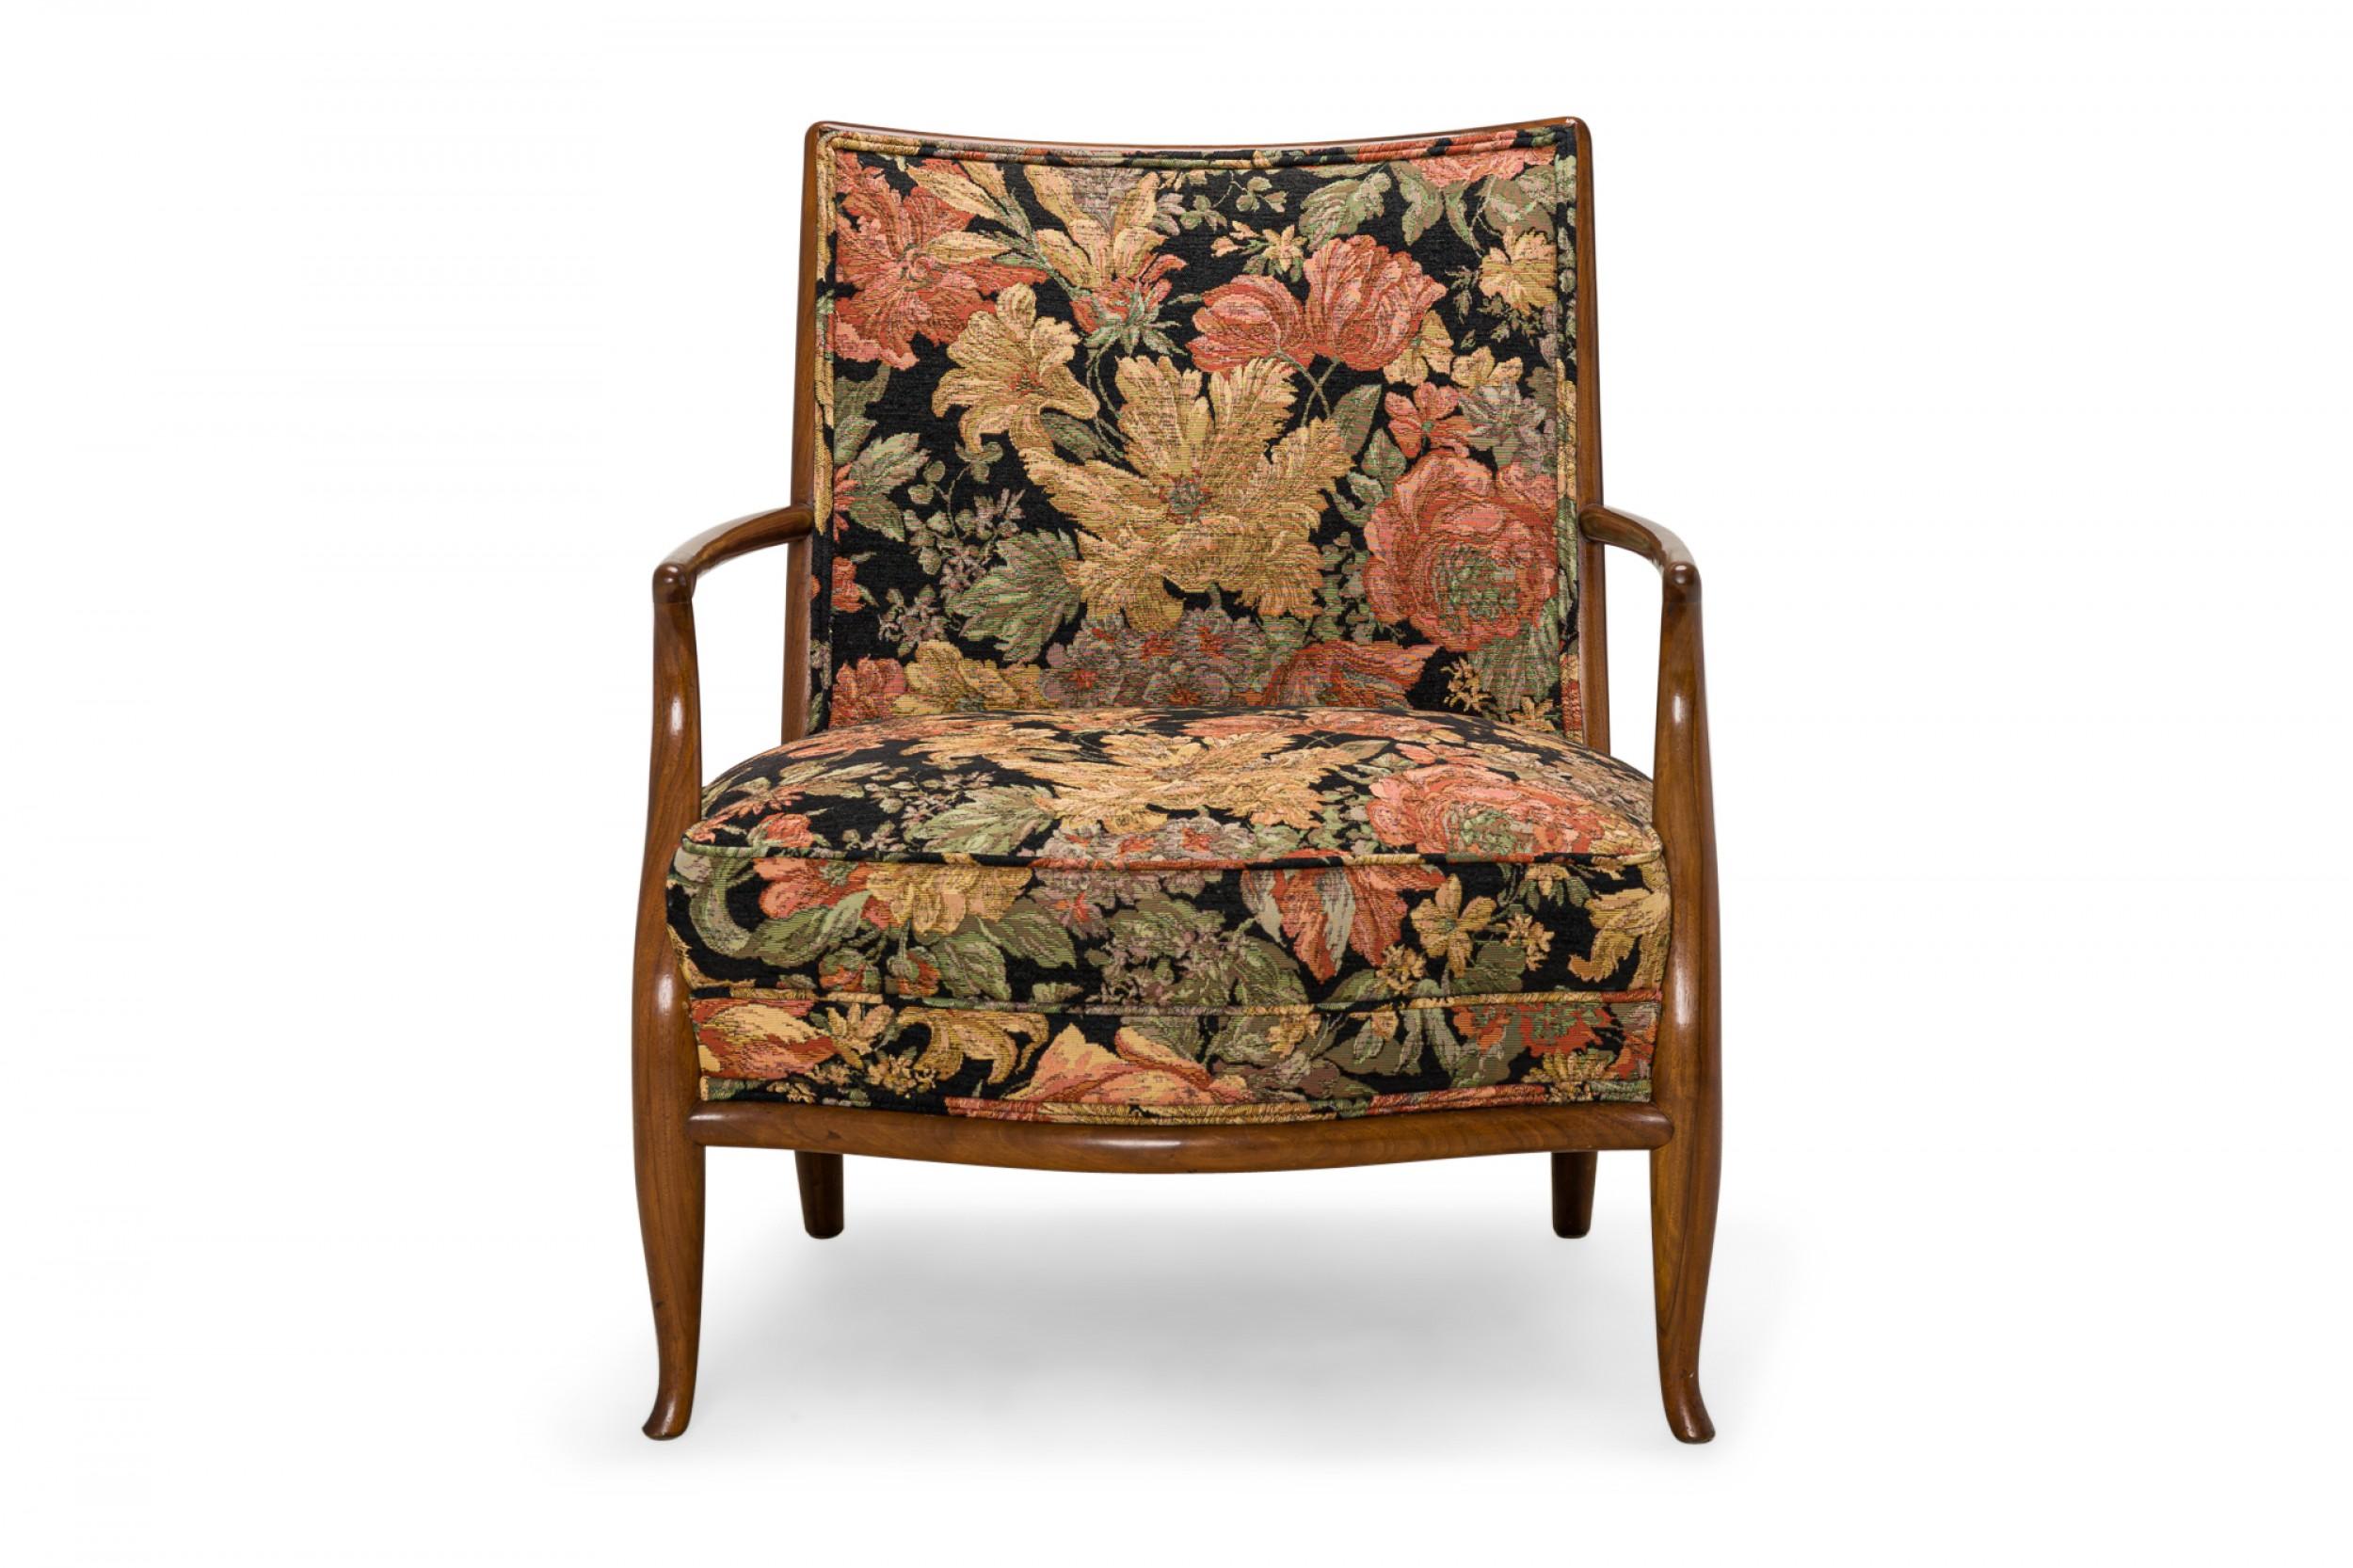 American mid-century 'French' lounge / armchair with a shaped walnut frame, square back, and multi-colored floral back and seat upholstery, resting on four gently curved walnut legs. (T.H. ROBSJOHN GIBBINGS FOR WIDDICOMB FURNITURE CO.)
 